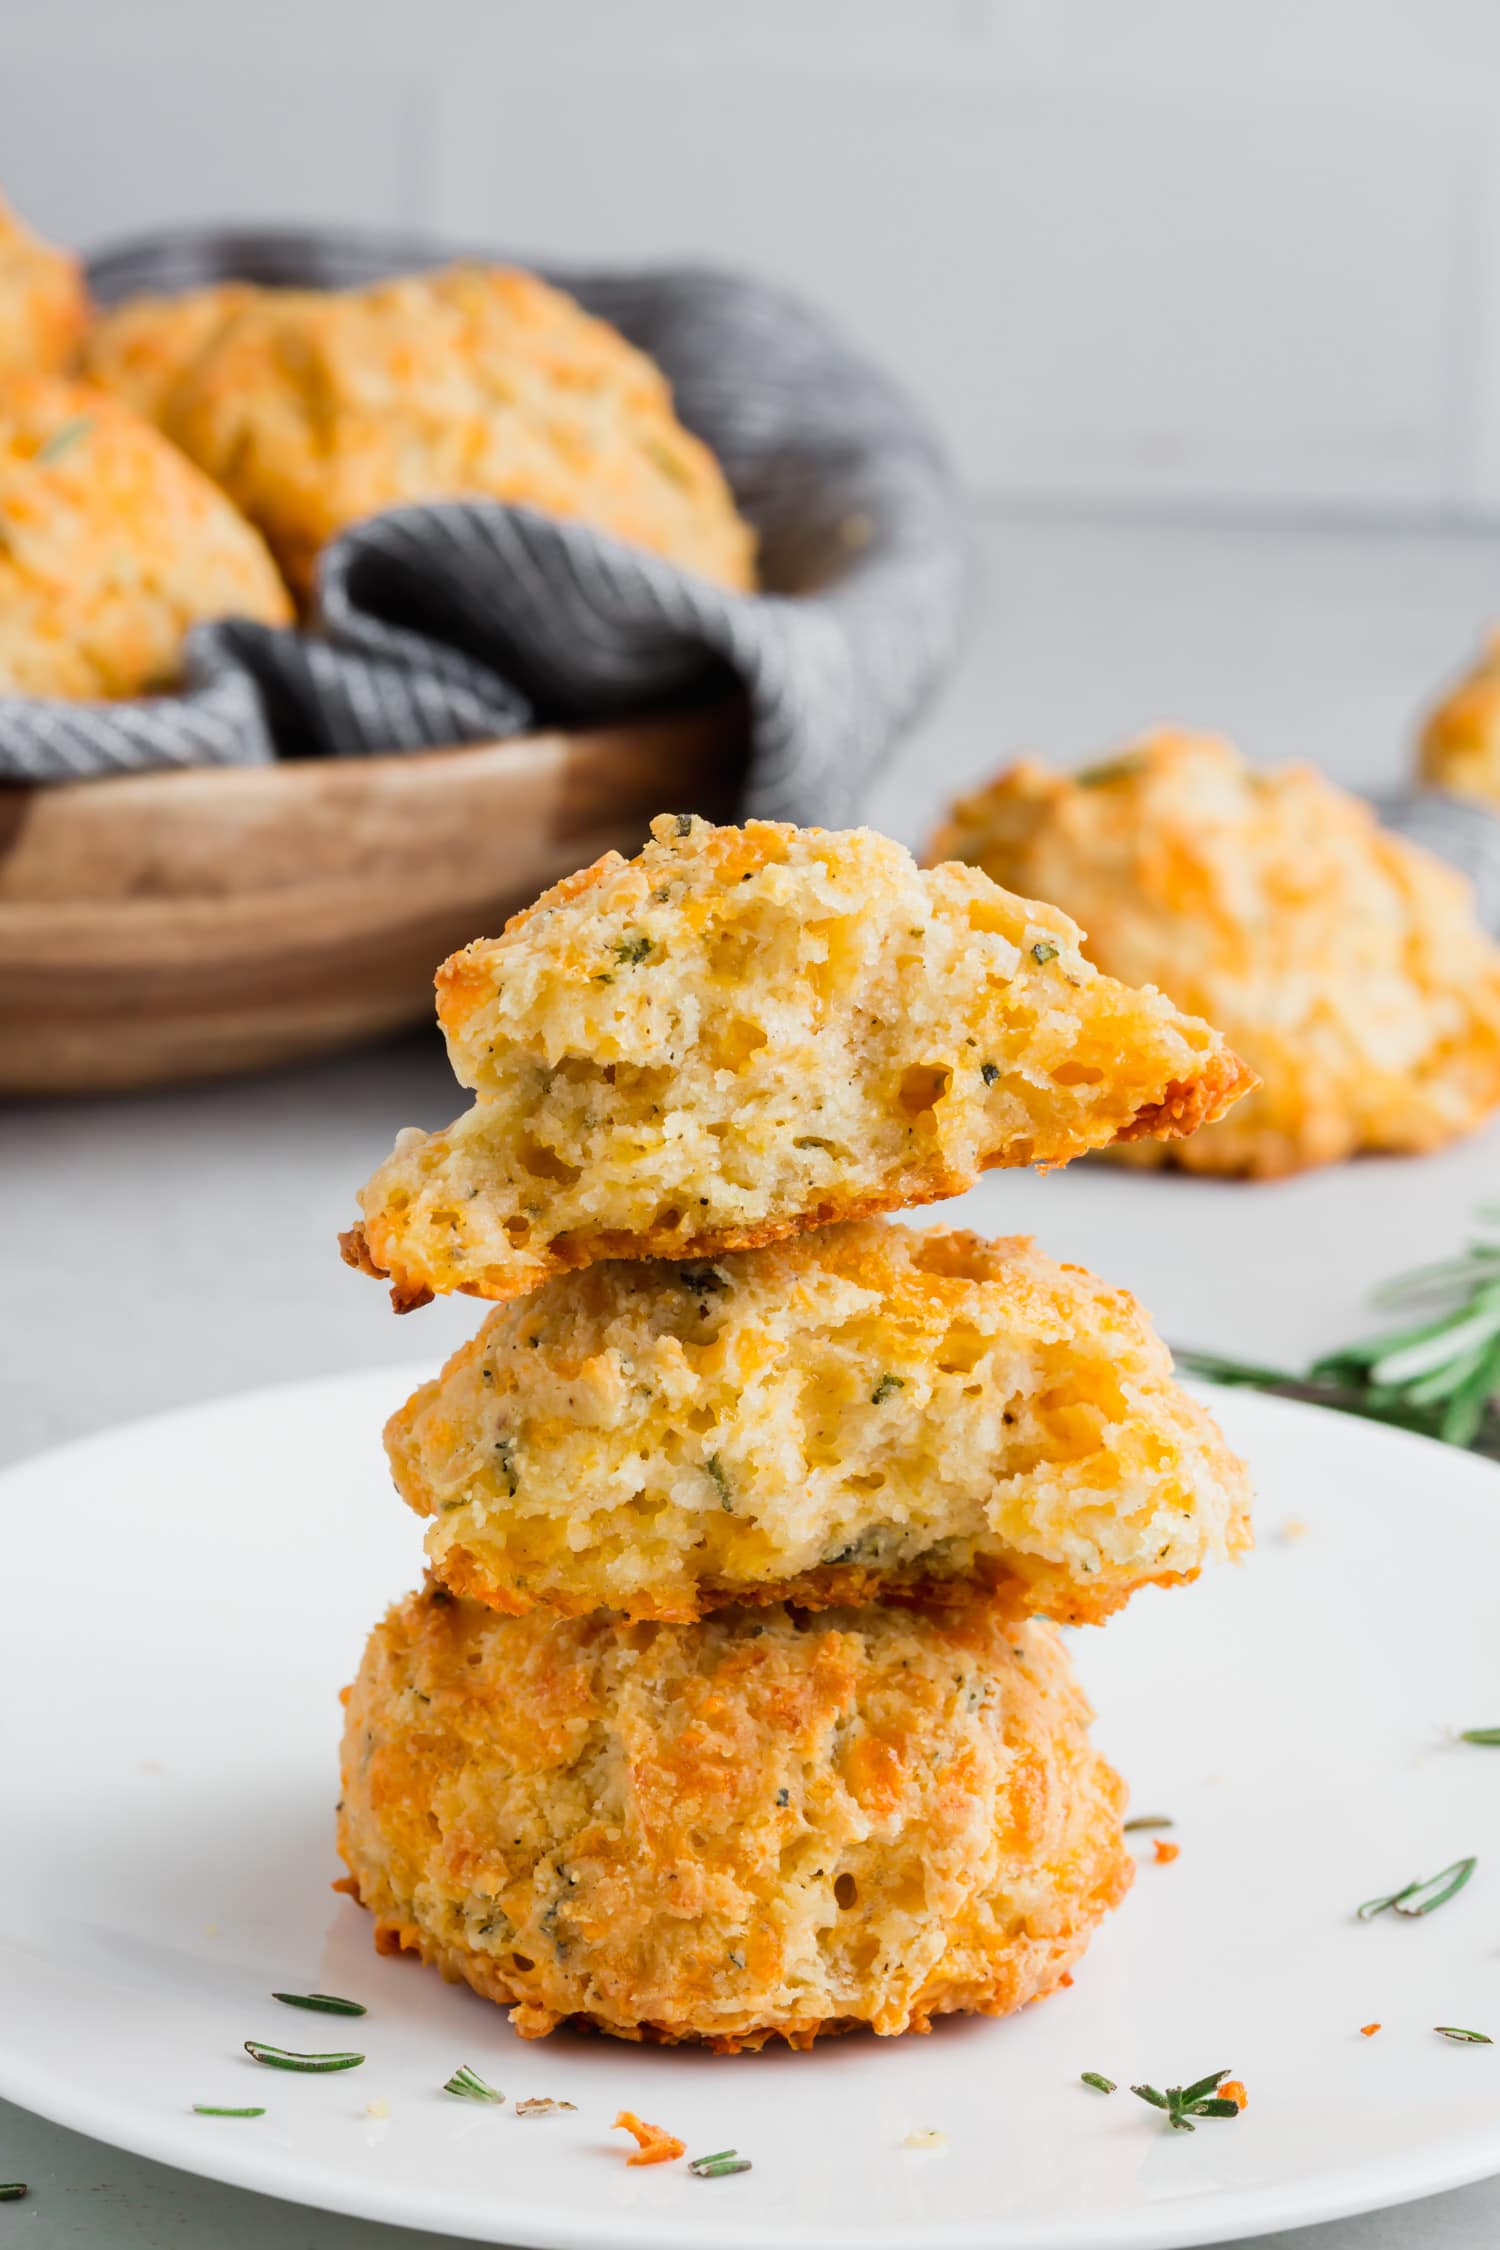 A photo of a stack of three cheddar biscuits with rosemary.